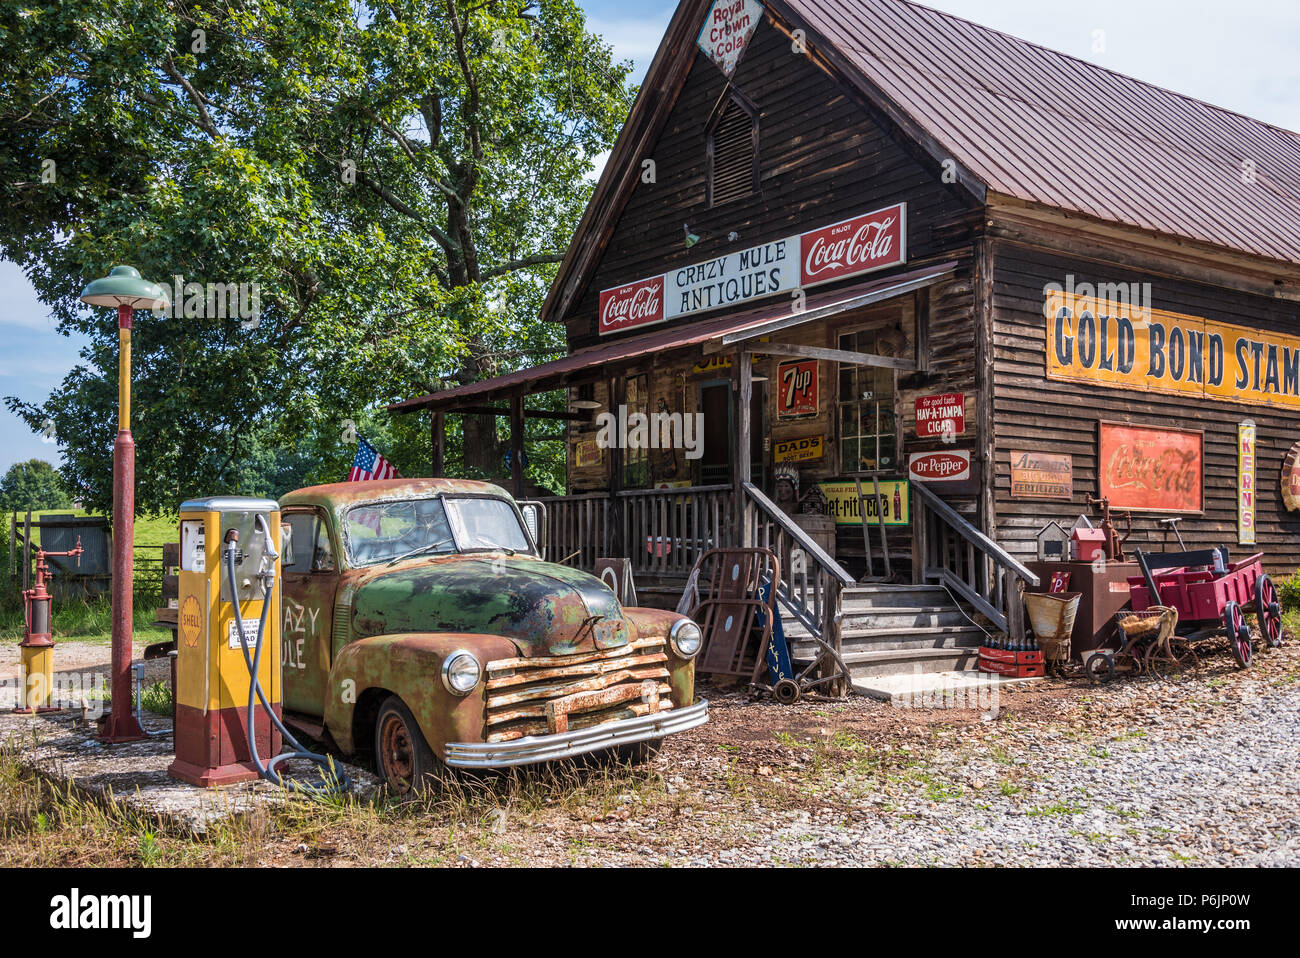 Crazy Mule Arts & Antiques in a 1909 Lula, Georgia general store building in the foothills of the Blue Ridge Mountains. (USA) Stock Photo